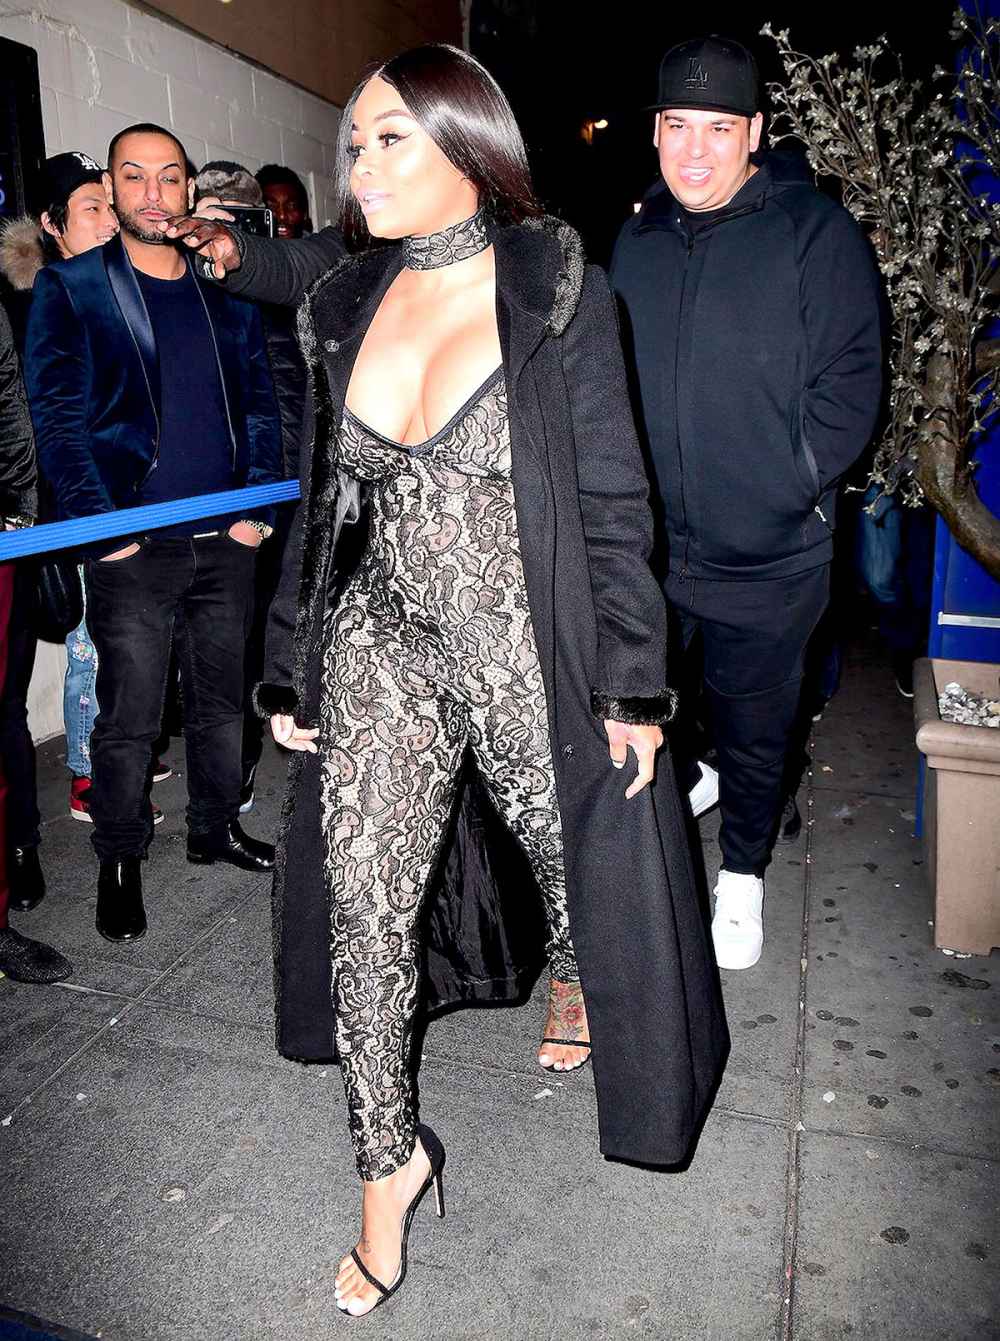 Blac Chyna and Rob Kardashian make their first red carpet appearance since giving birth to Dream